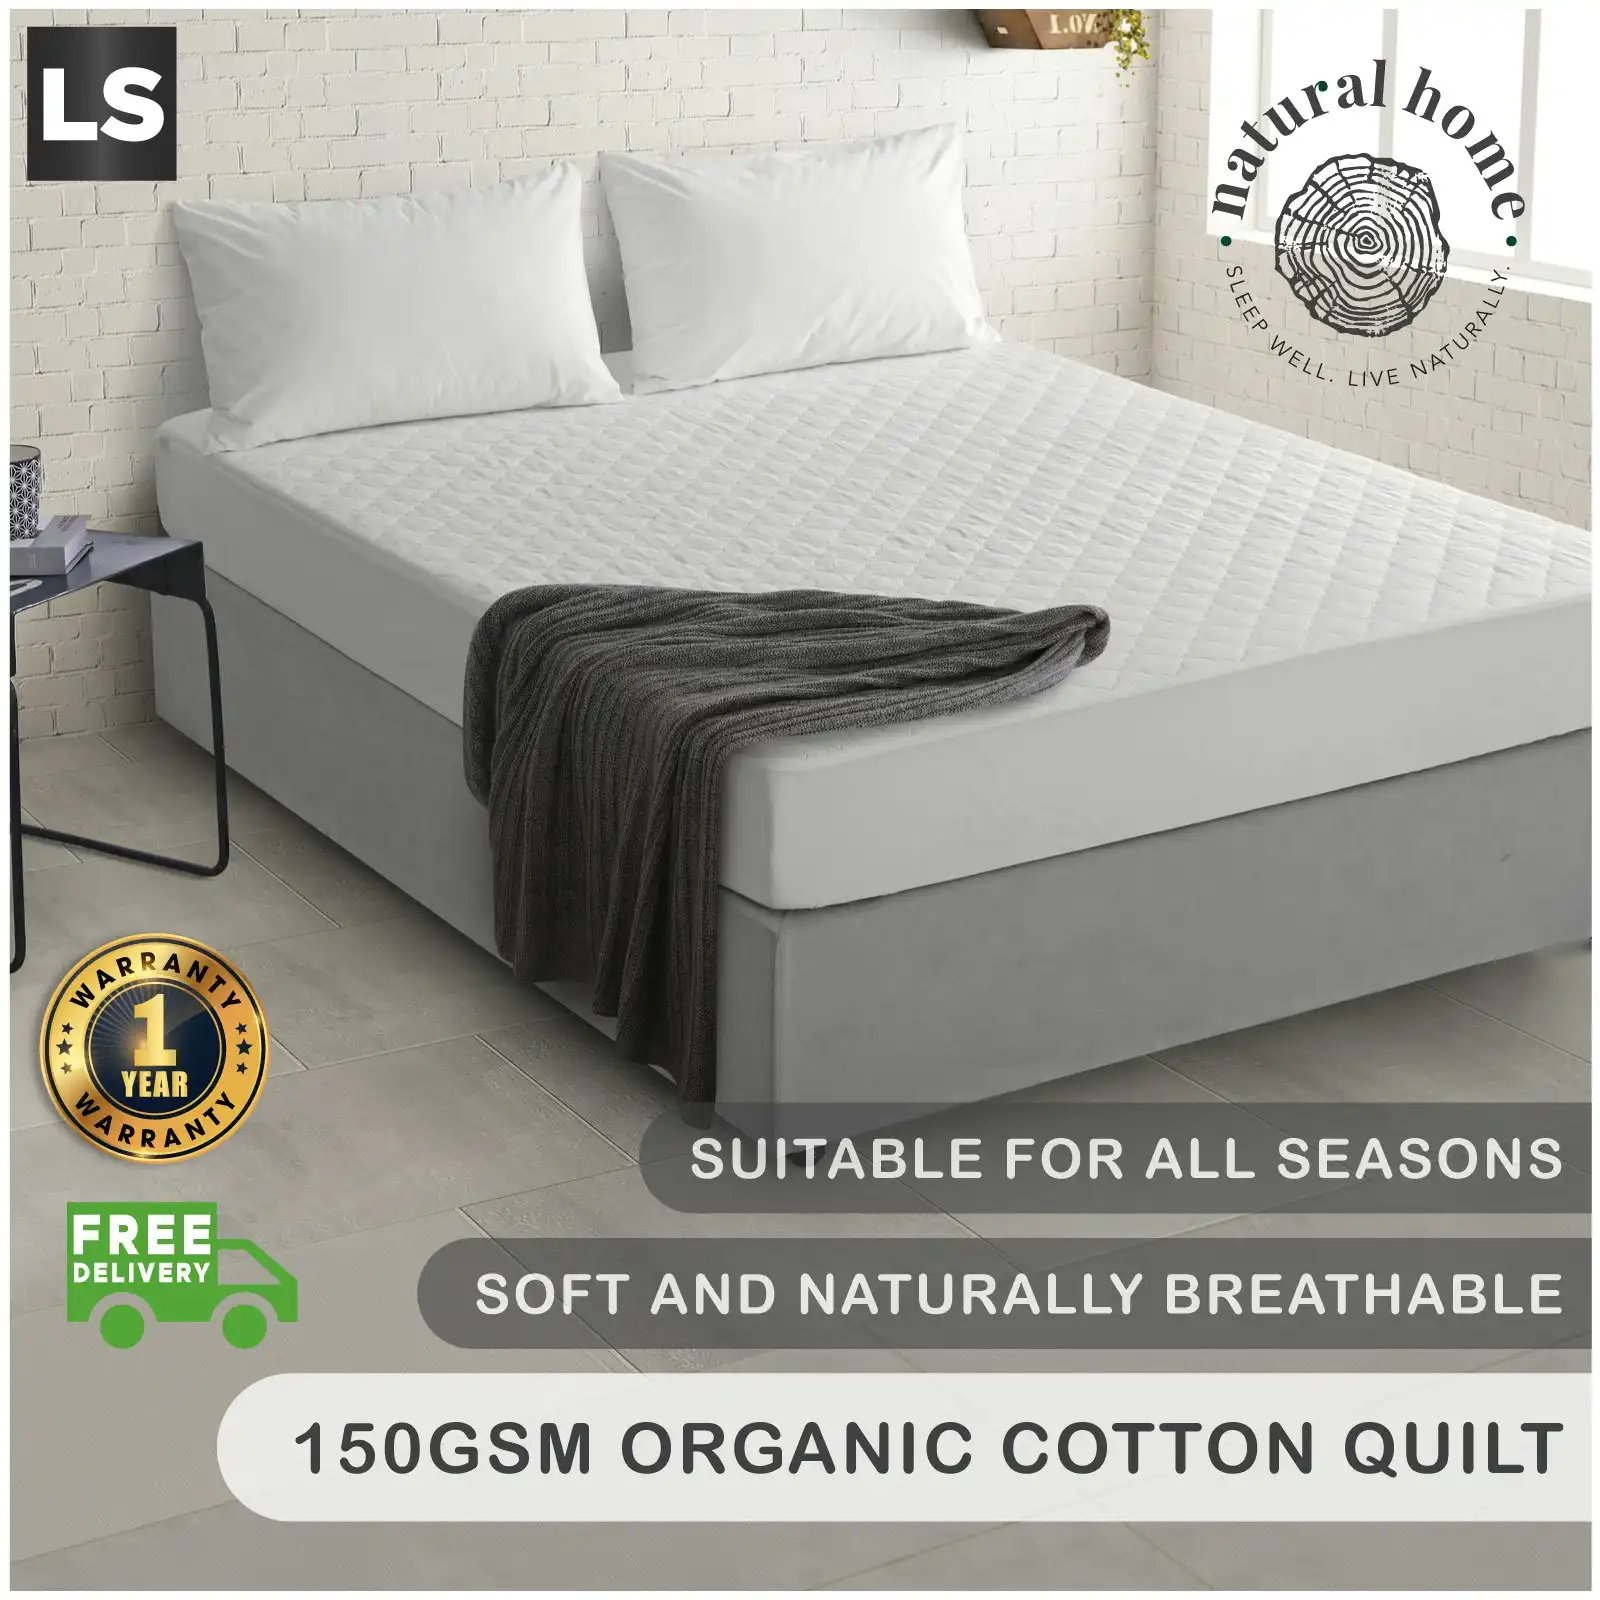 Natural Home Organic Cotton Quilted Mattress Protector White Long Single Bed